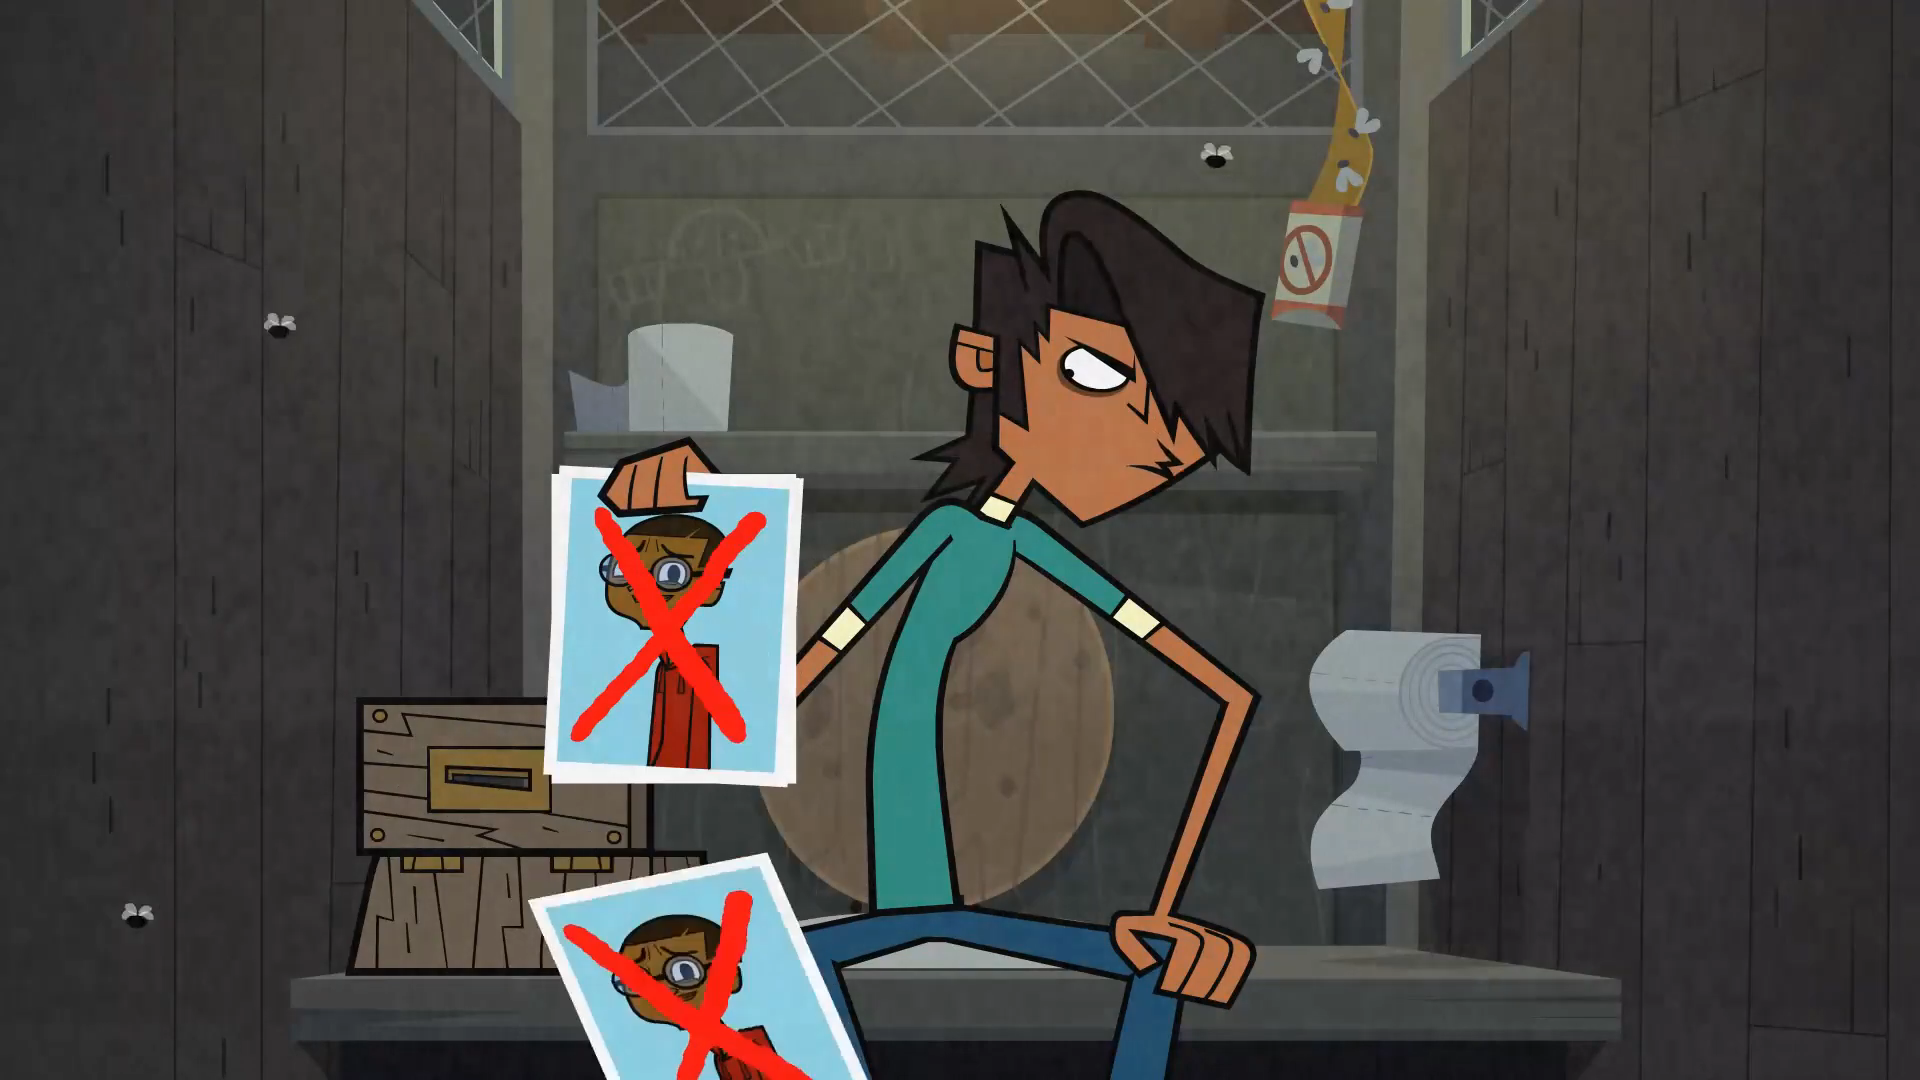 Total Drama Characters Mike